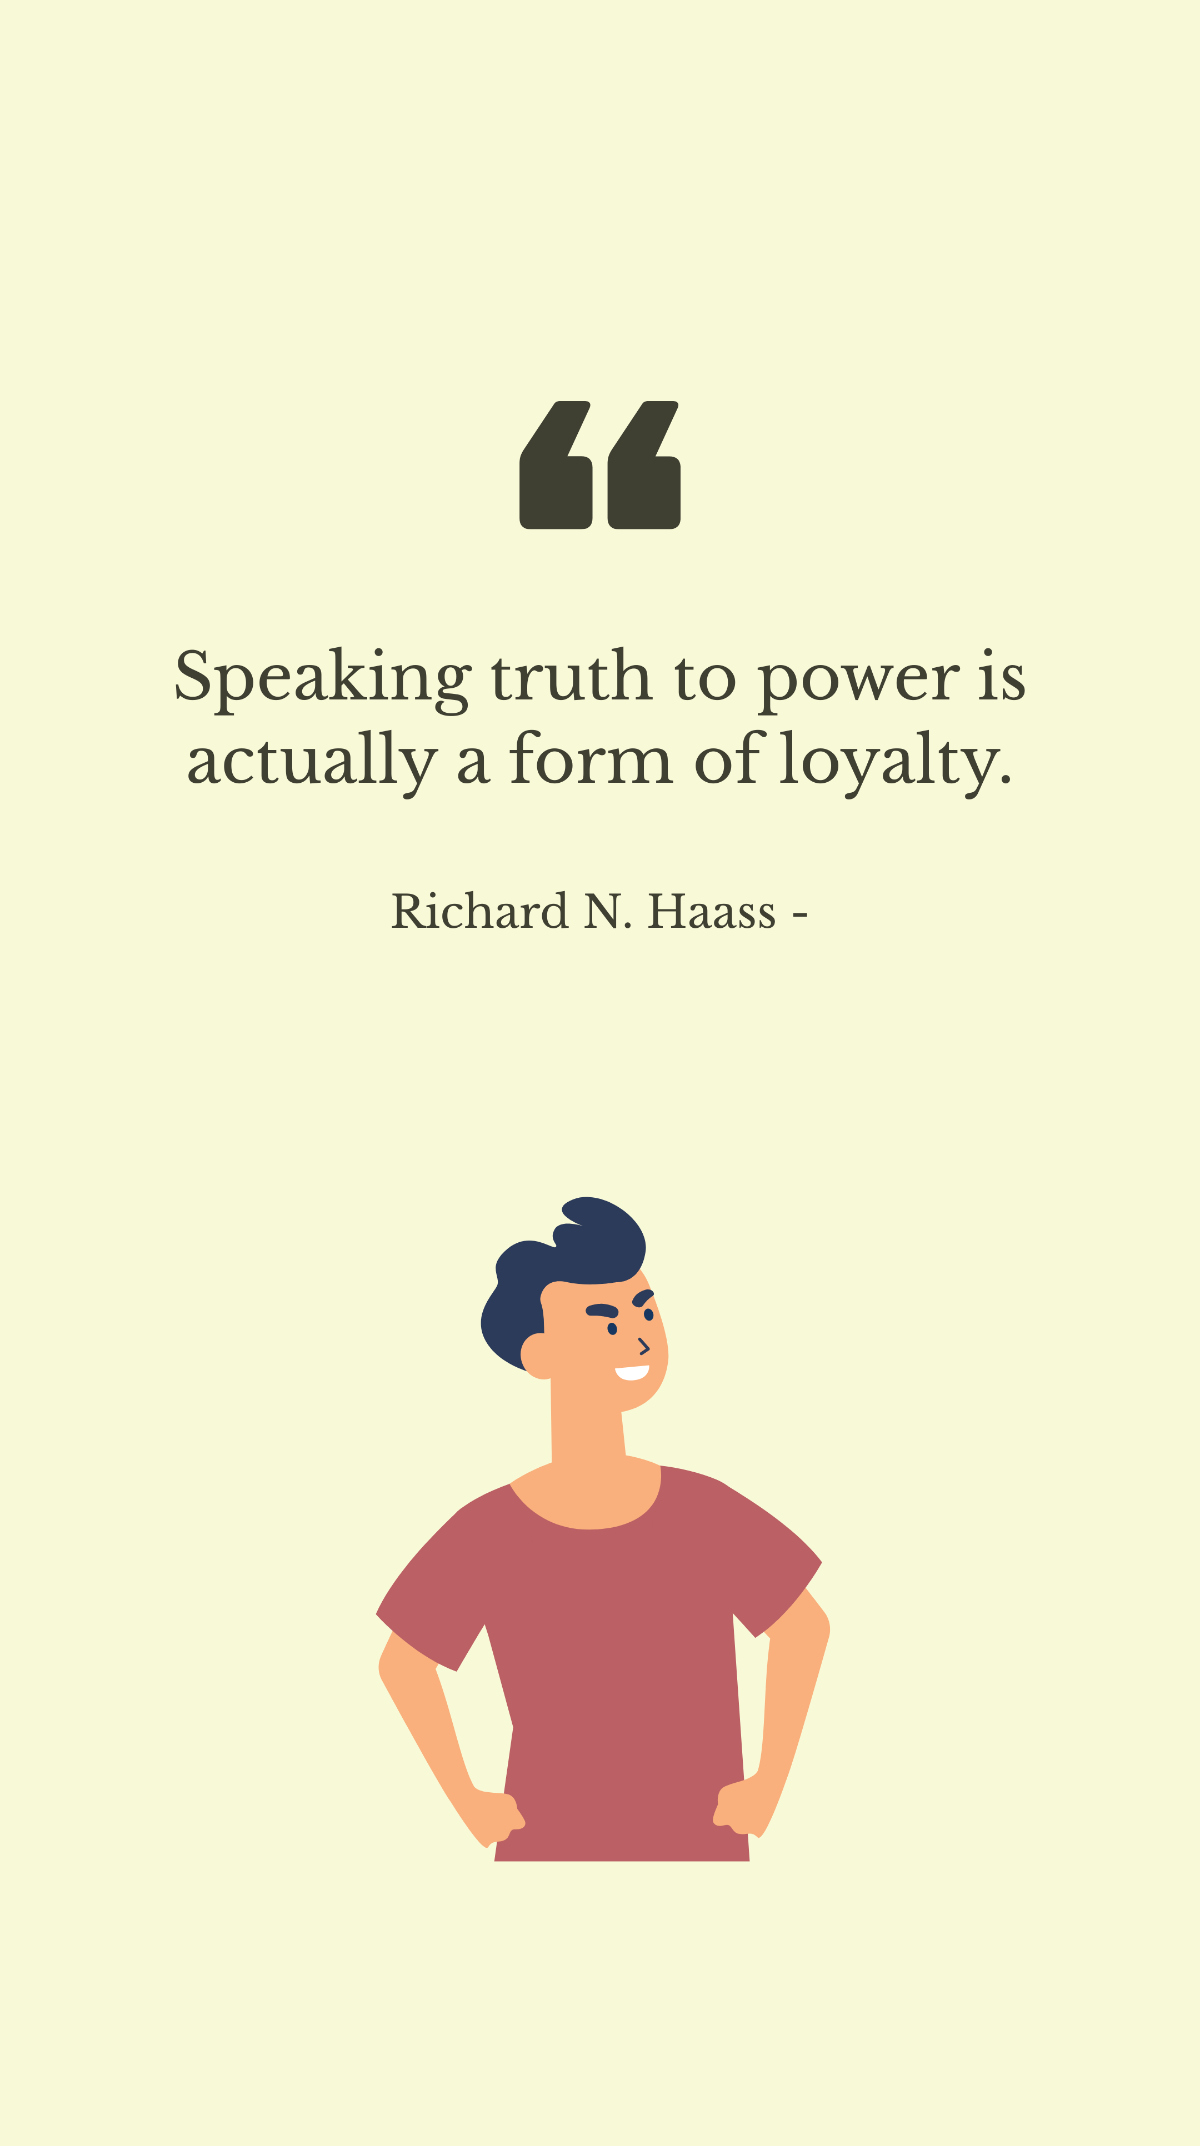 Richard N. Haass - Speaking truth to power is actually a form of loyalty.